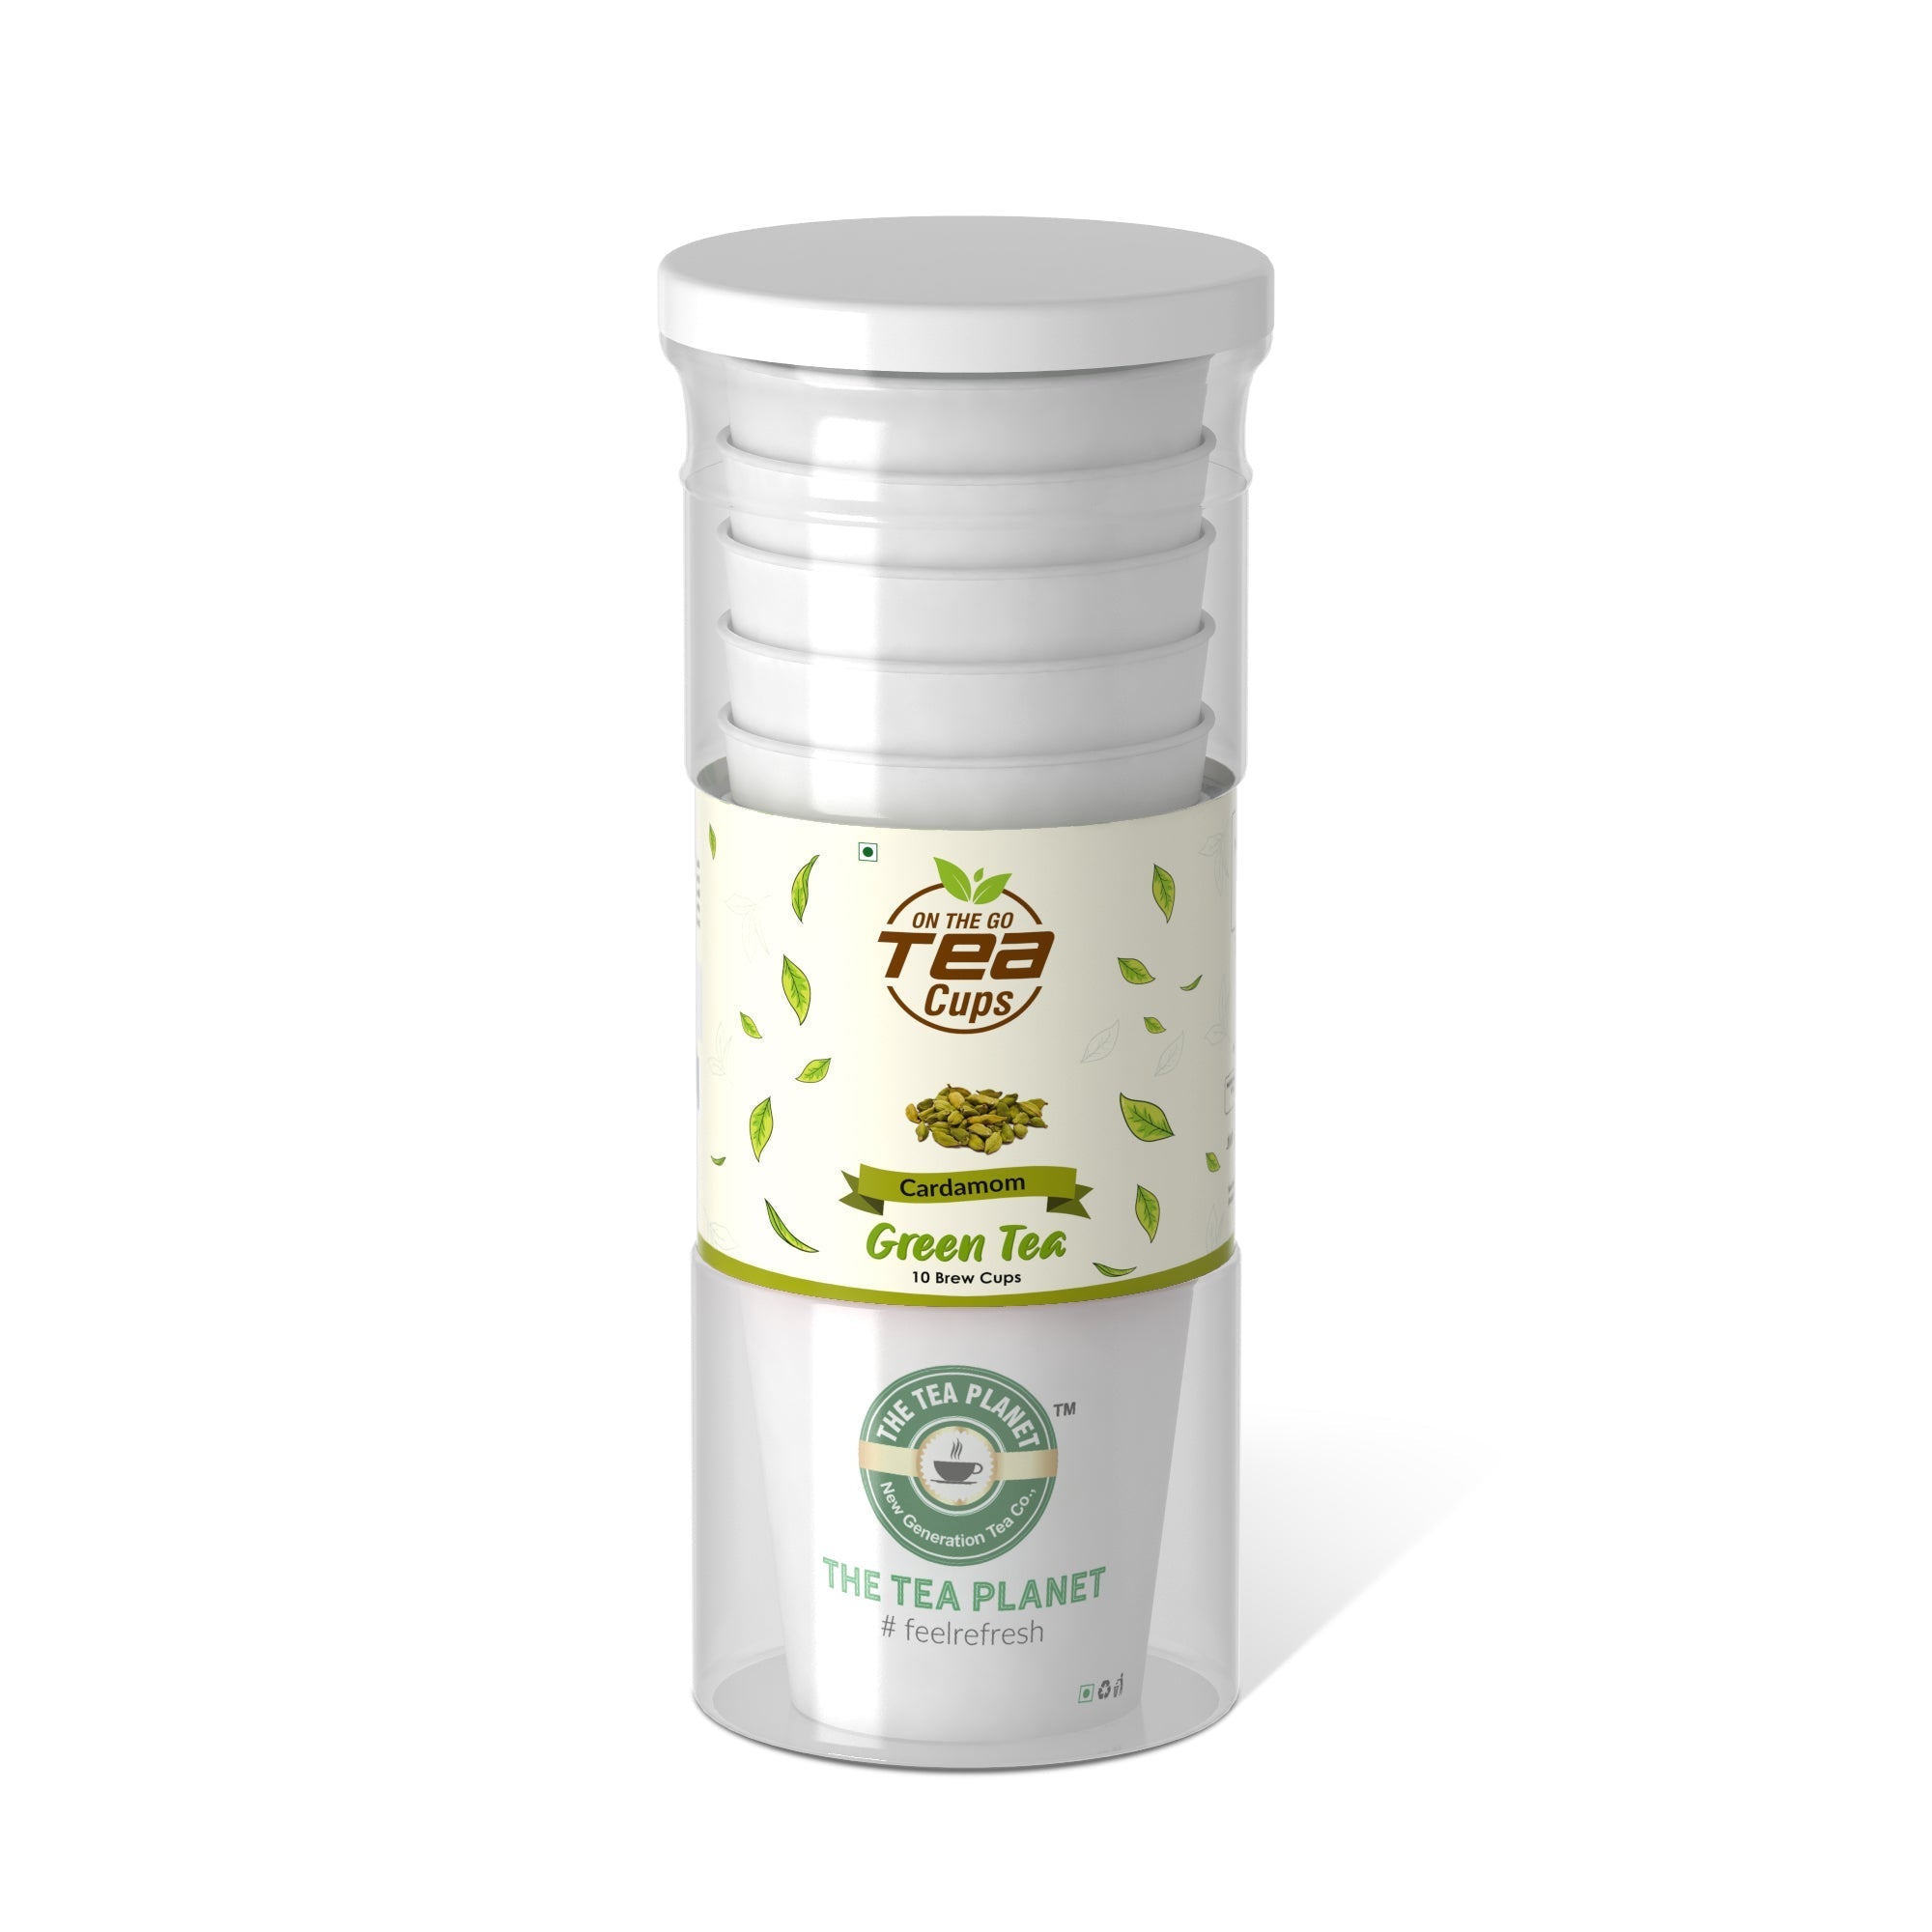 Cardamom Instant Green Tea Brew Cup - 20 cups